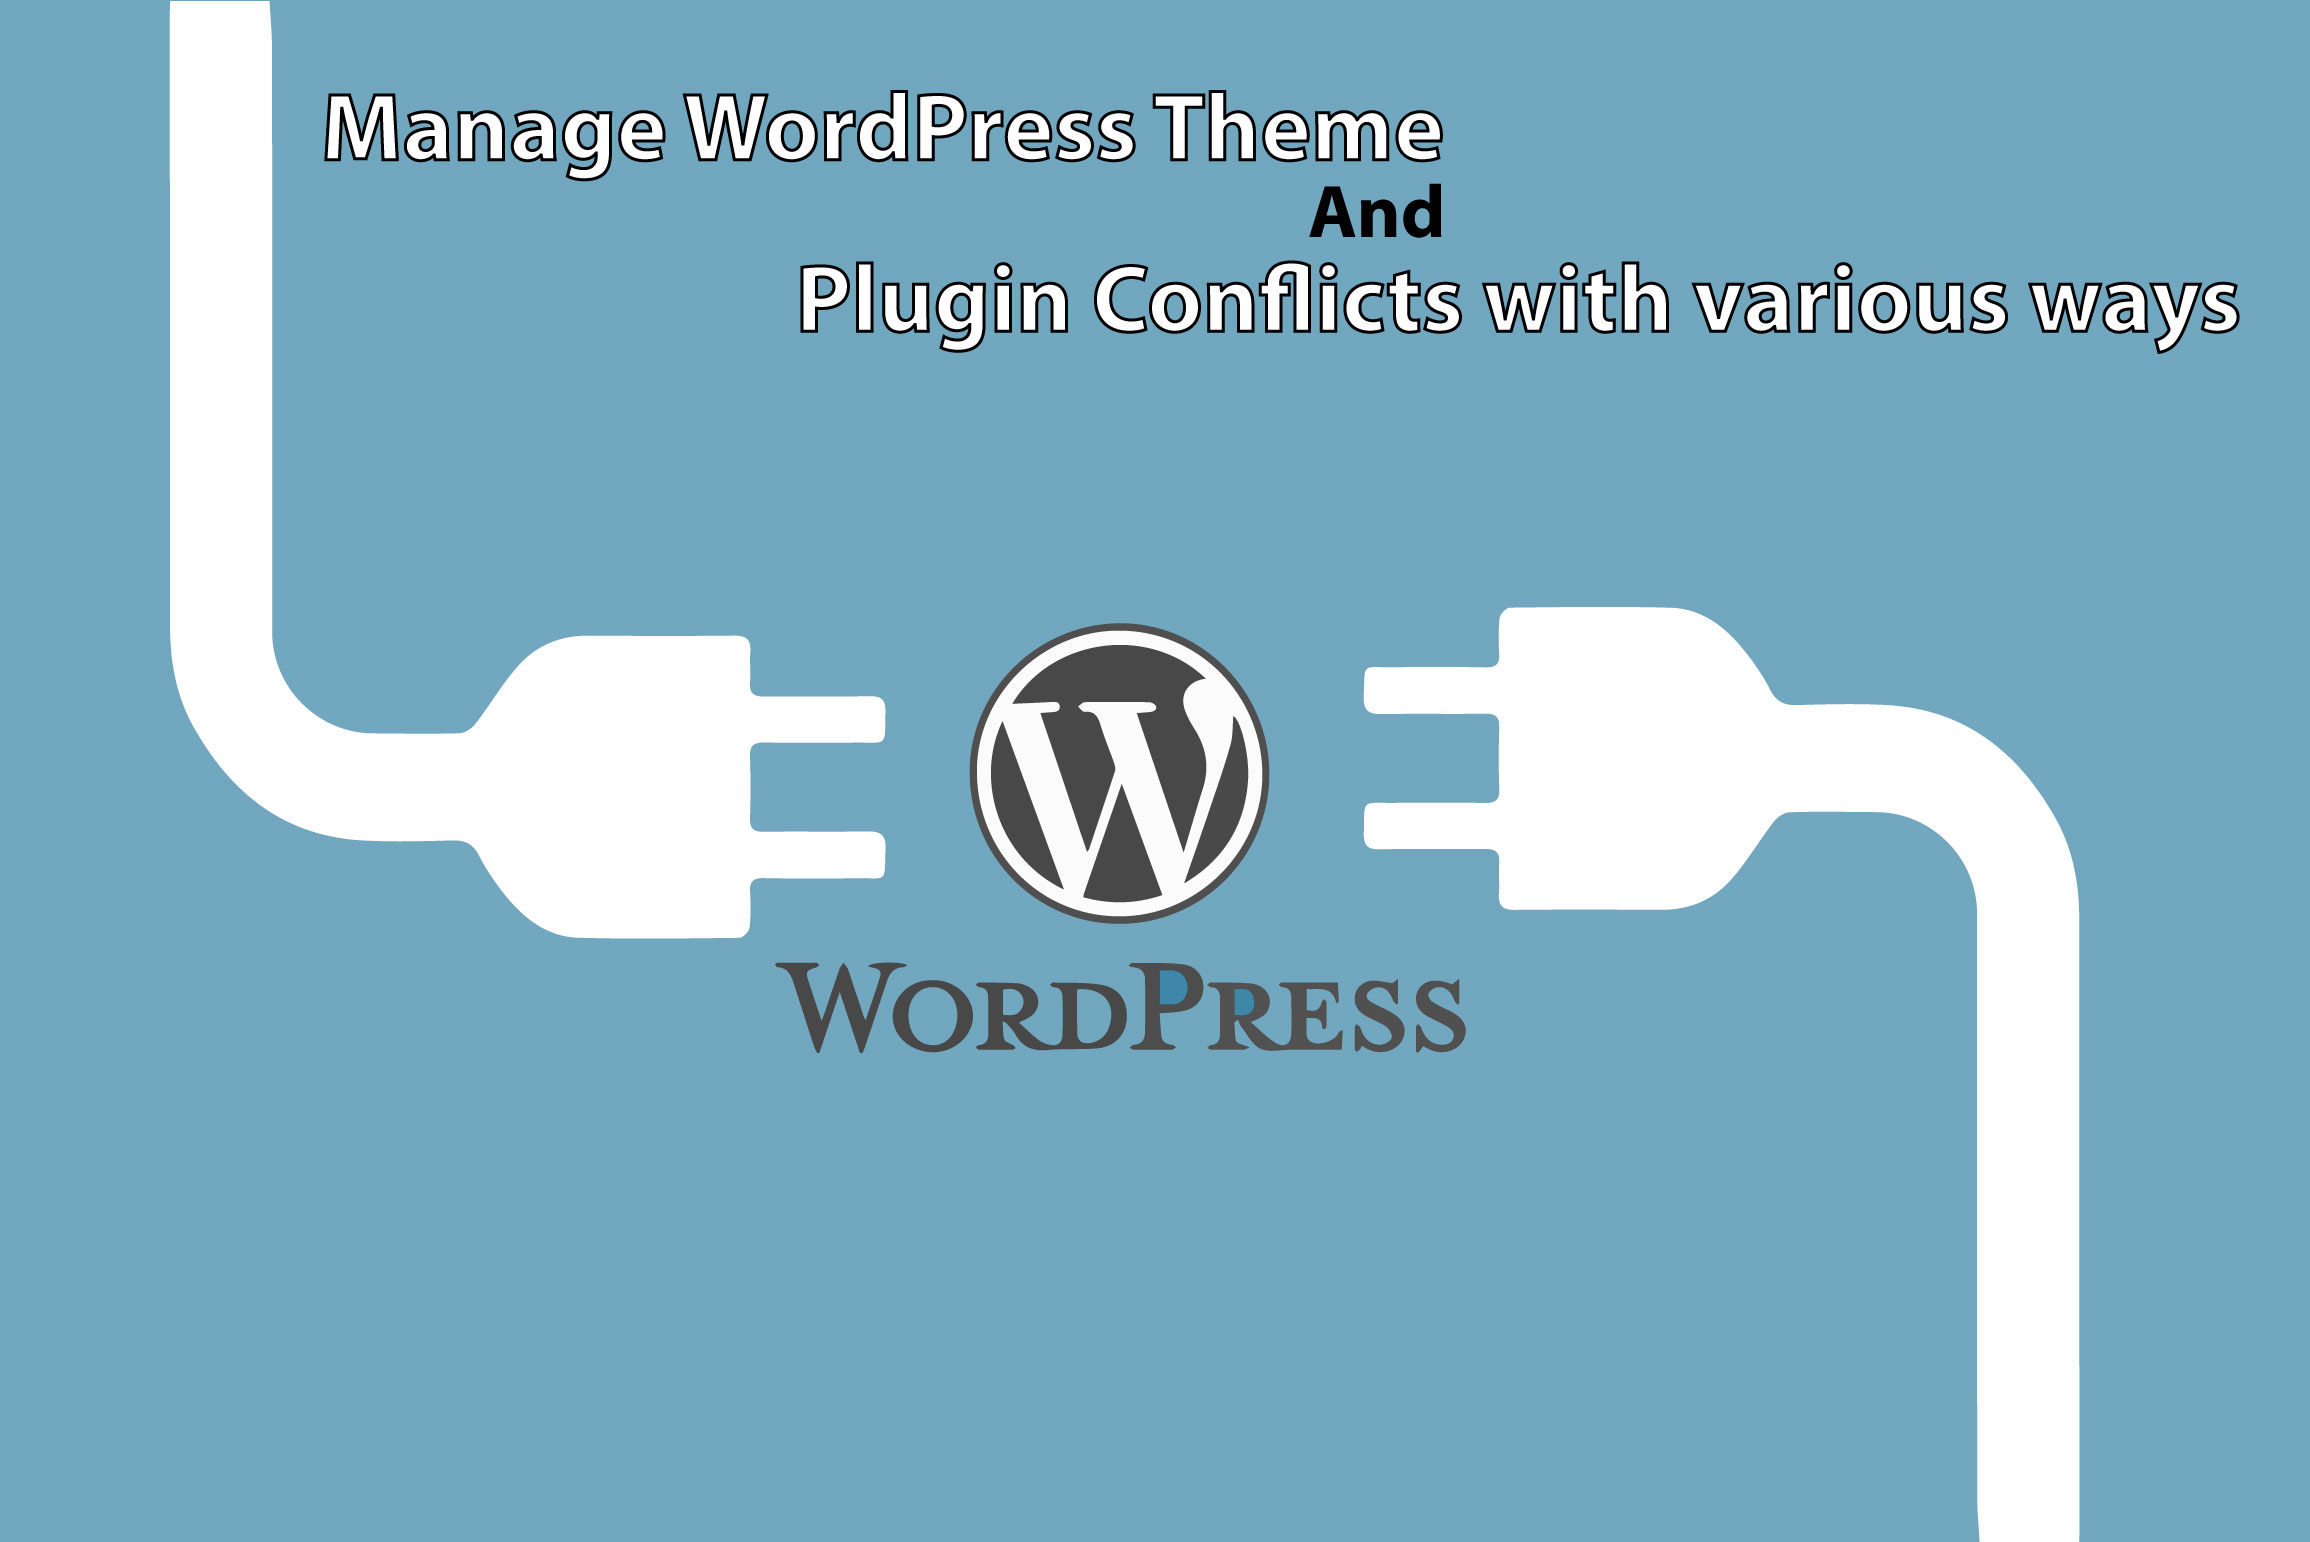 Manage WordPress Theme And Plugin Conflicts with various ways